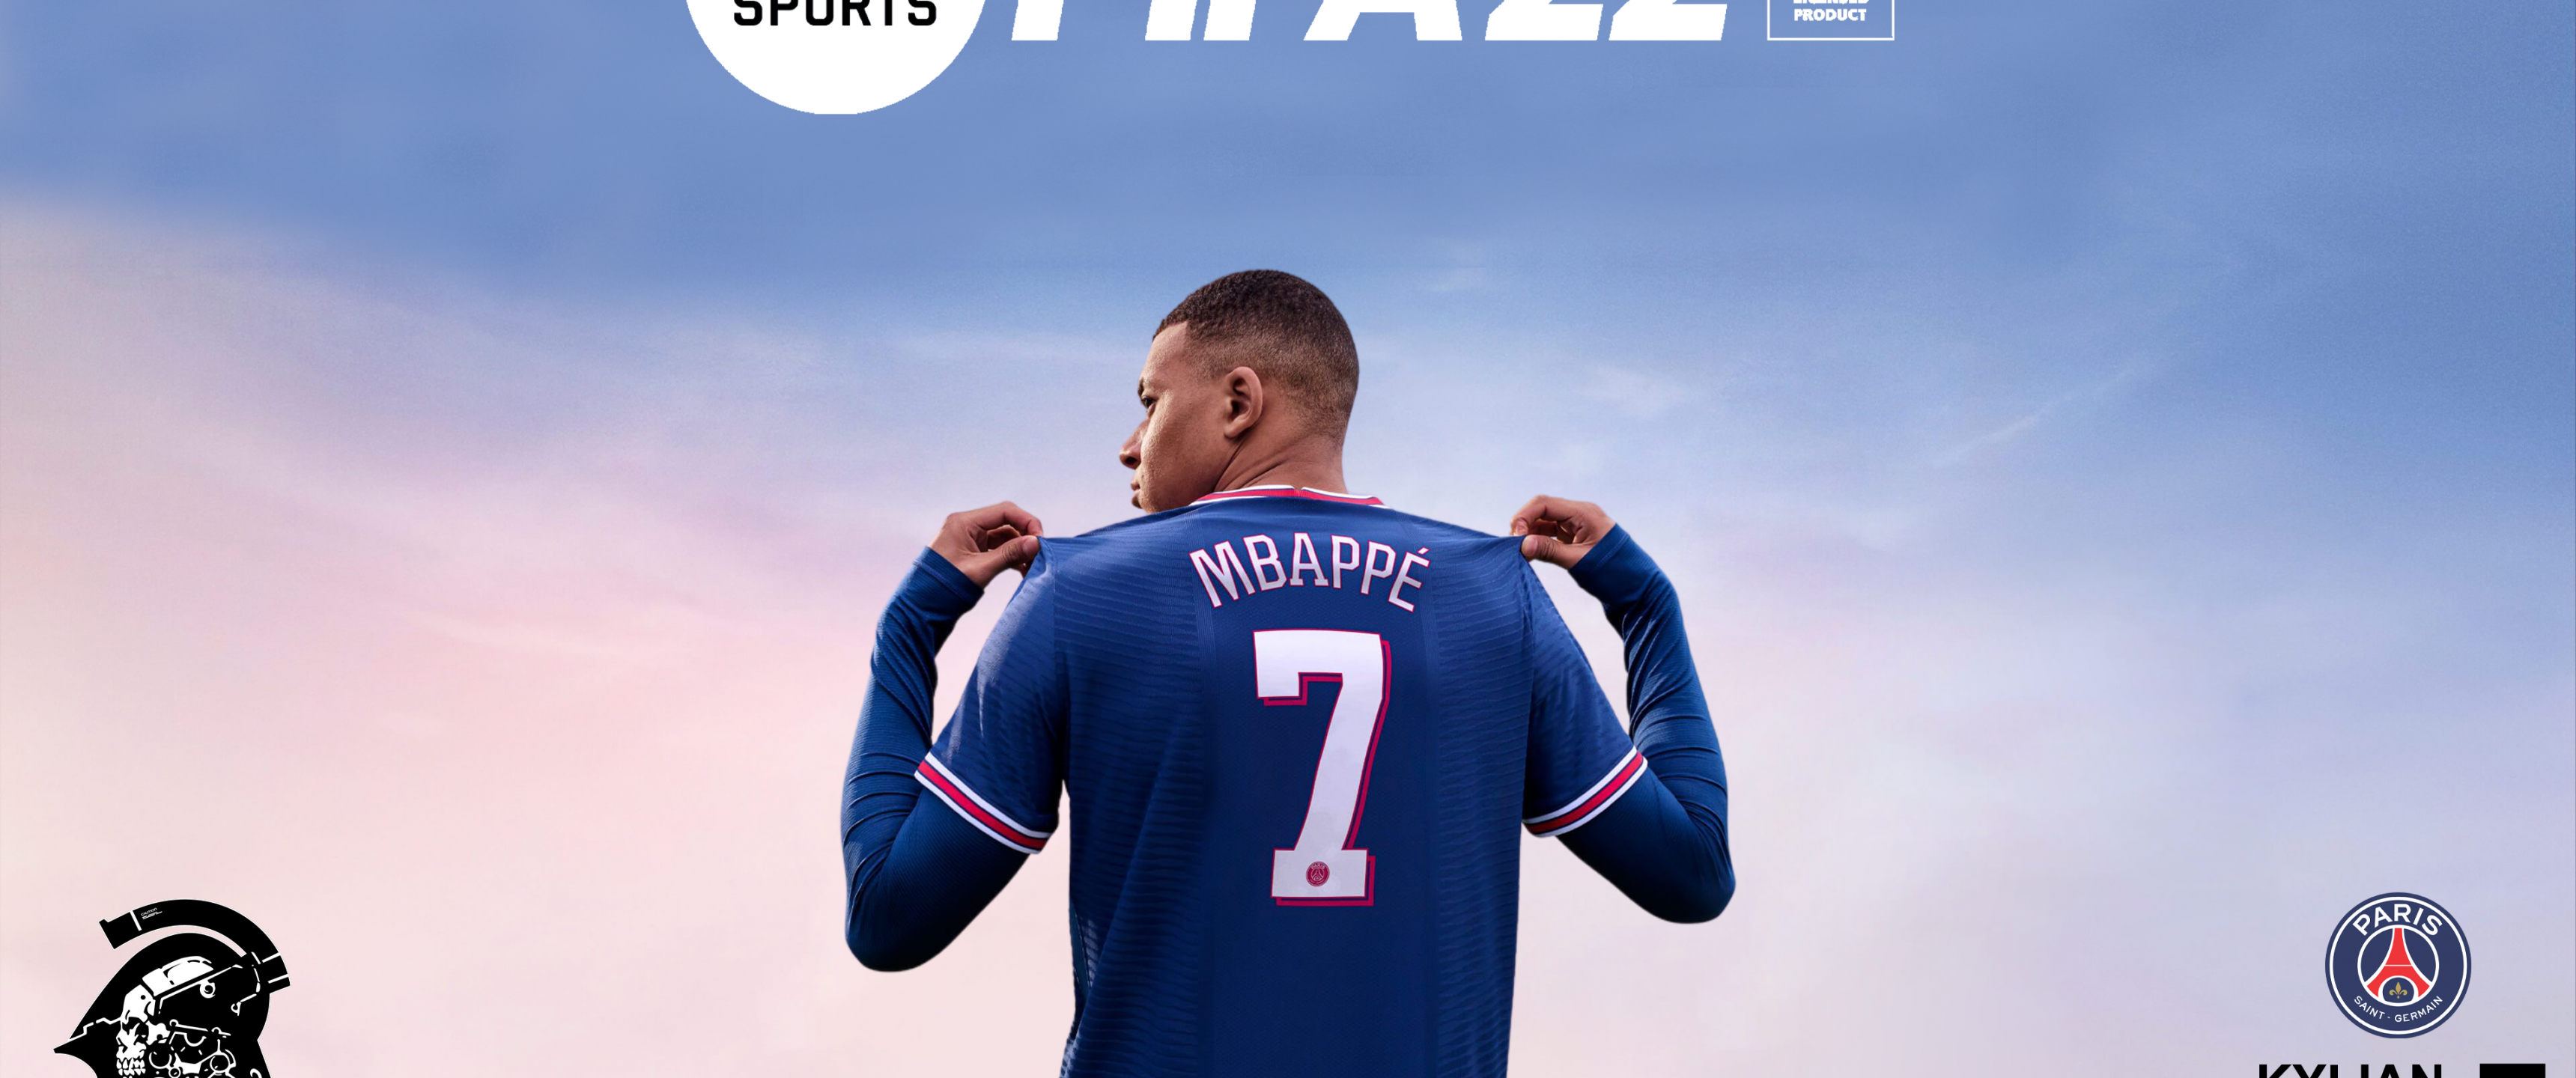 Kylian Mbappé Wallpaper HD 202 APK (Android App) - Free Download